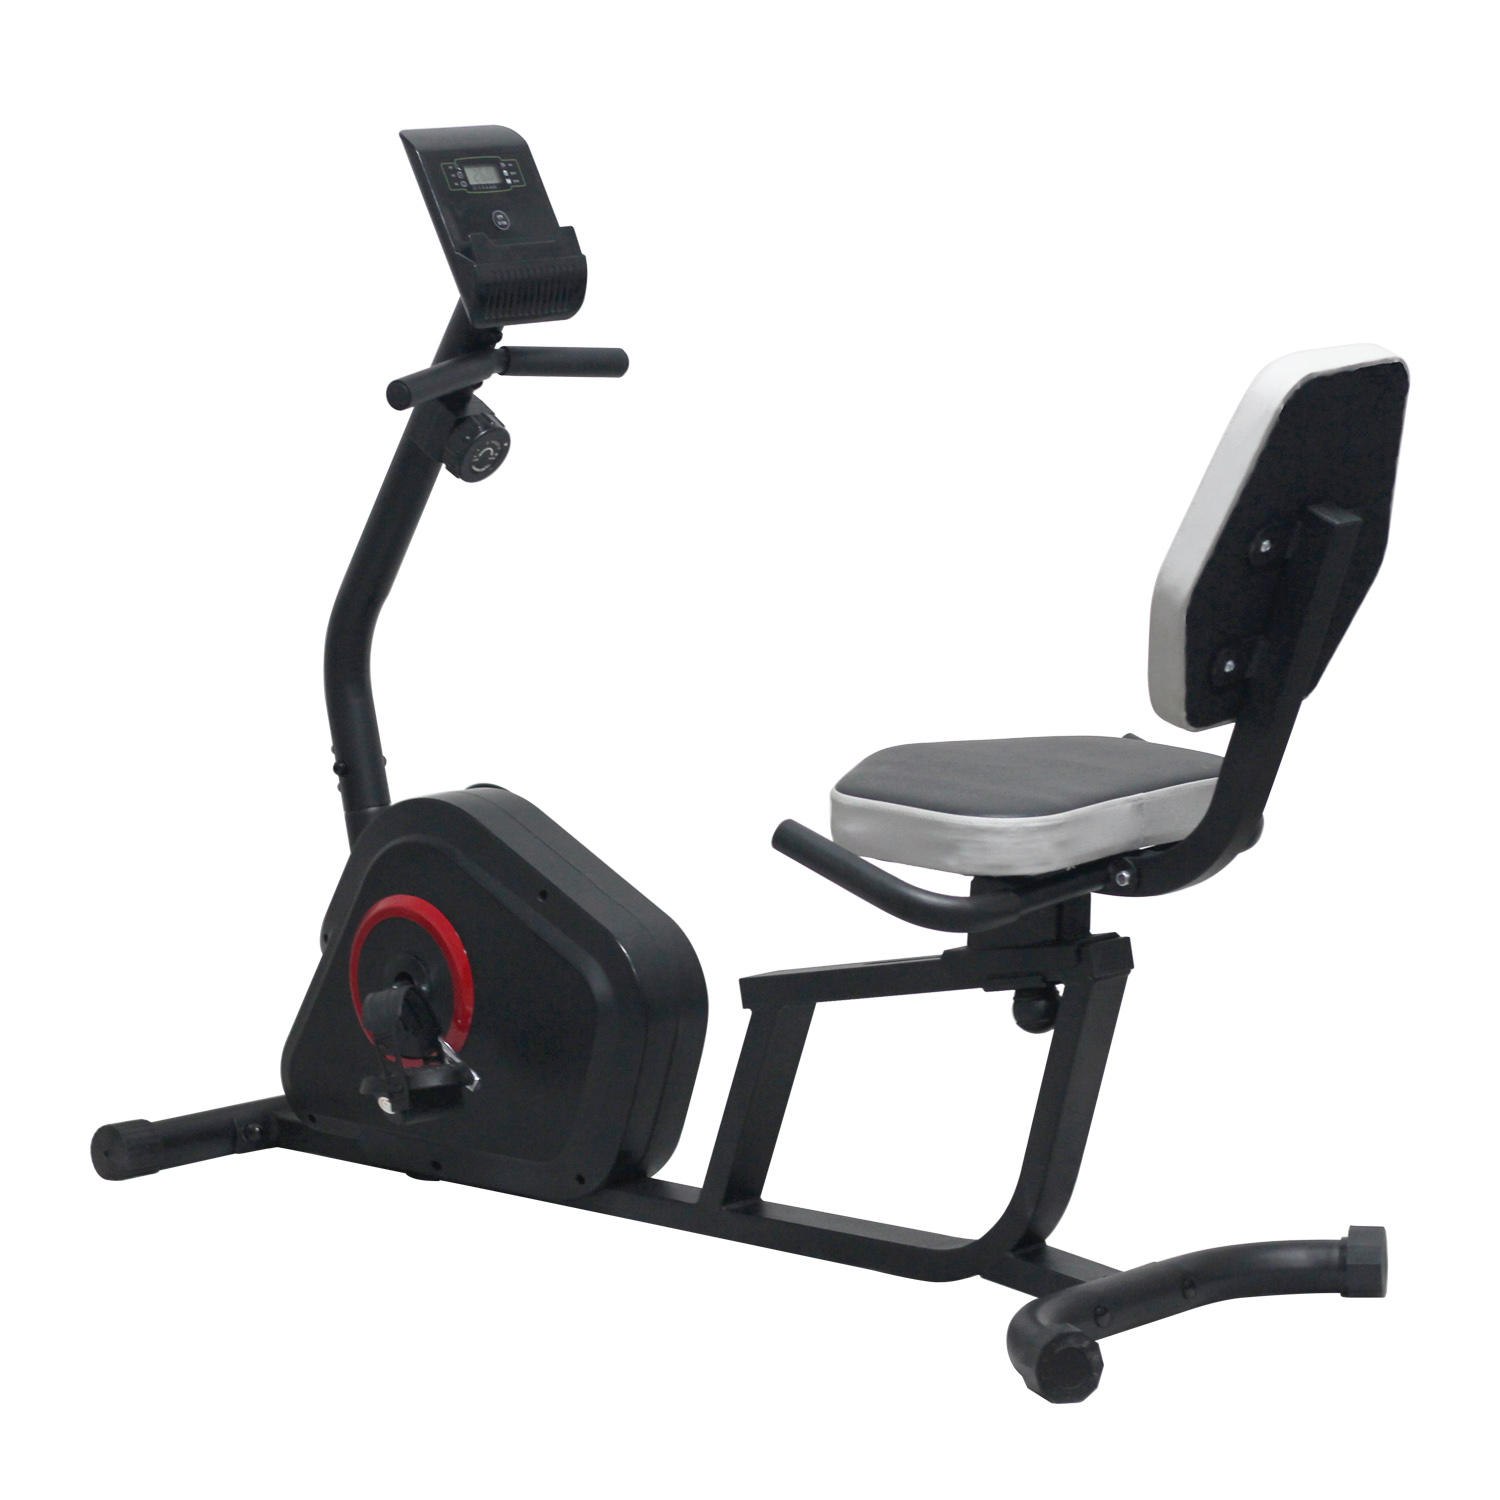 Revolutionizing Comfort and Efficiency: The Magnetic Resistance Recumbent Exercise Bike Takes Fitness to New Heights